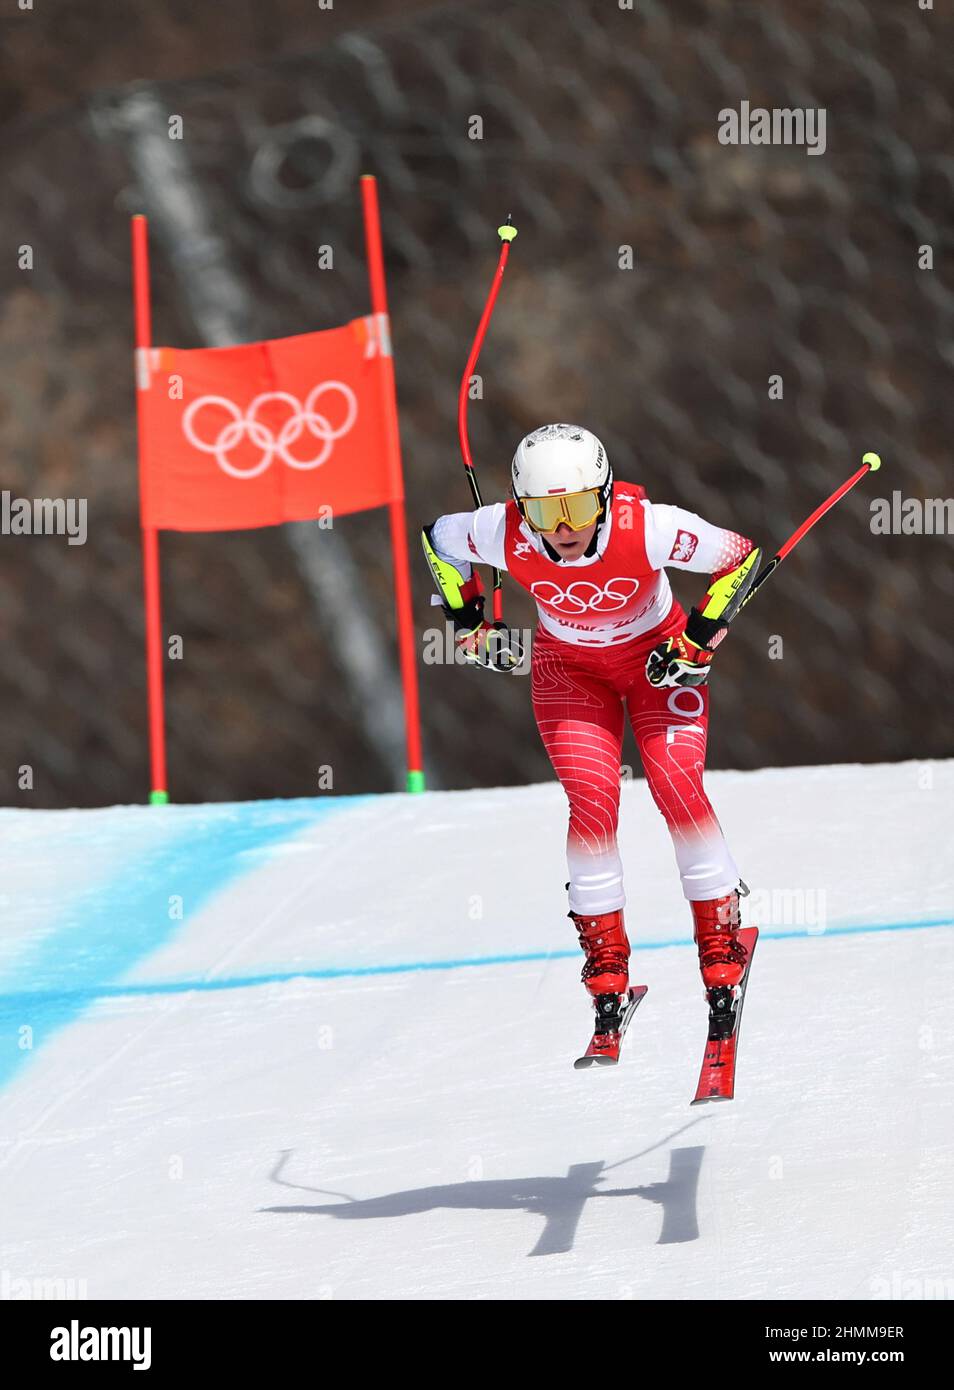 Beijing, China. 11th Feb, 2022. Maryna Gasienica-Daniel of Poland competes during alpine skiing women's Super-G of Beijing 2022 Winter Olympics at National Alpine Skiing Centre in Yanqing District, Beijing, capital of China, Feb. 11, 2022. Credit: Chen Bin/Xinhua/Alamy Live News Stock Photo